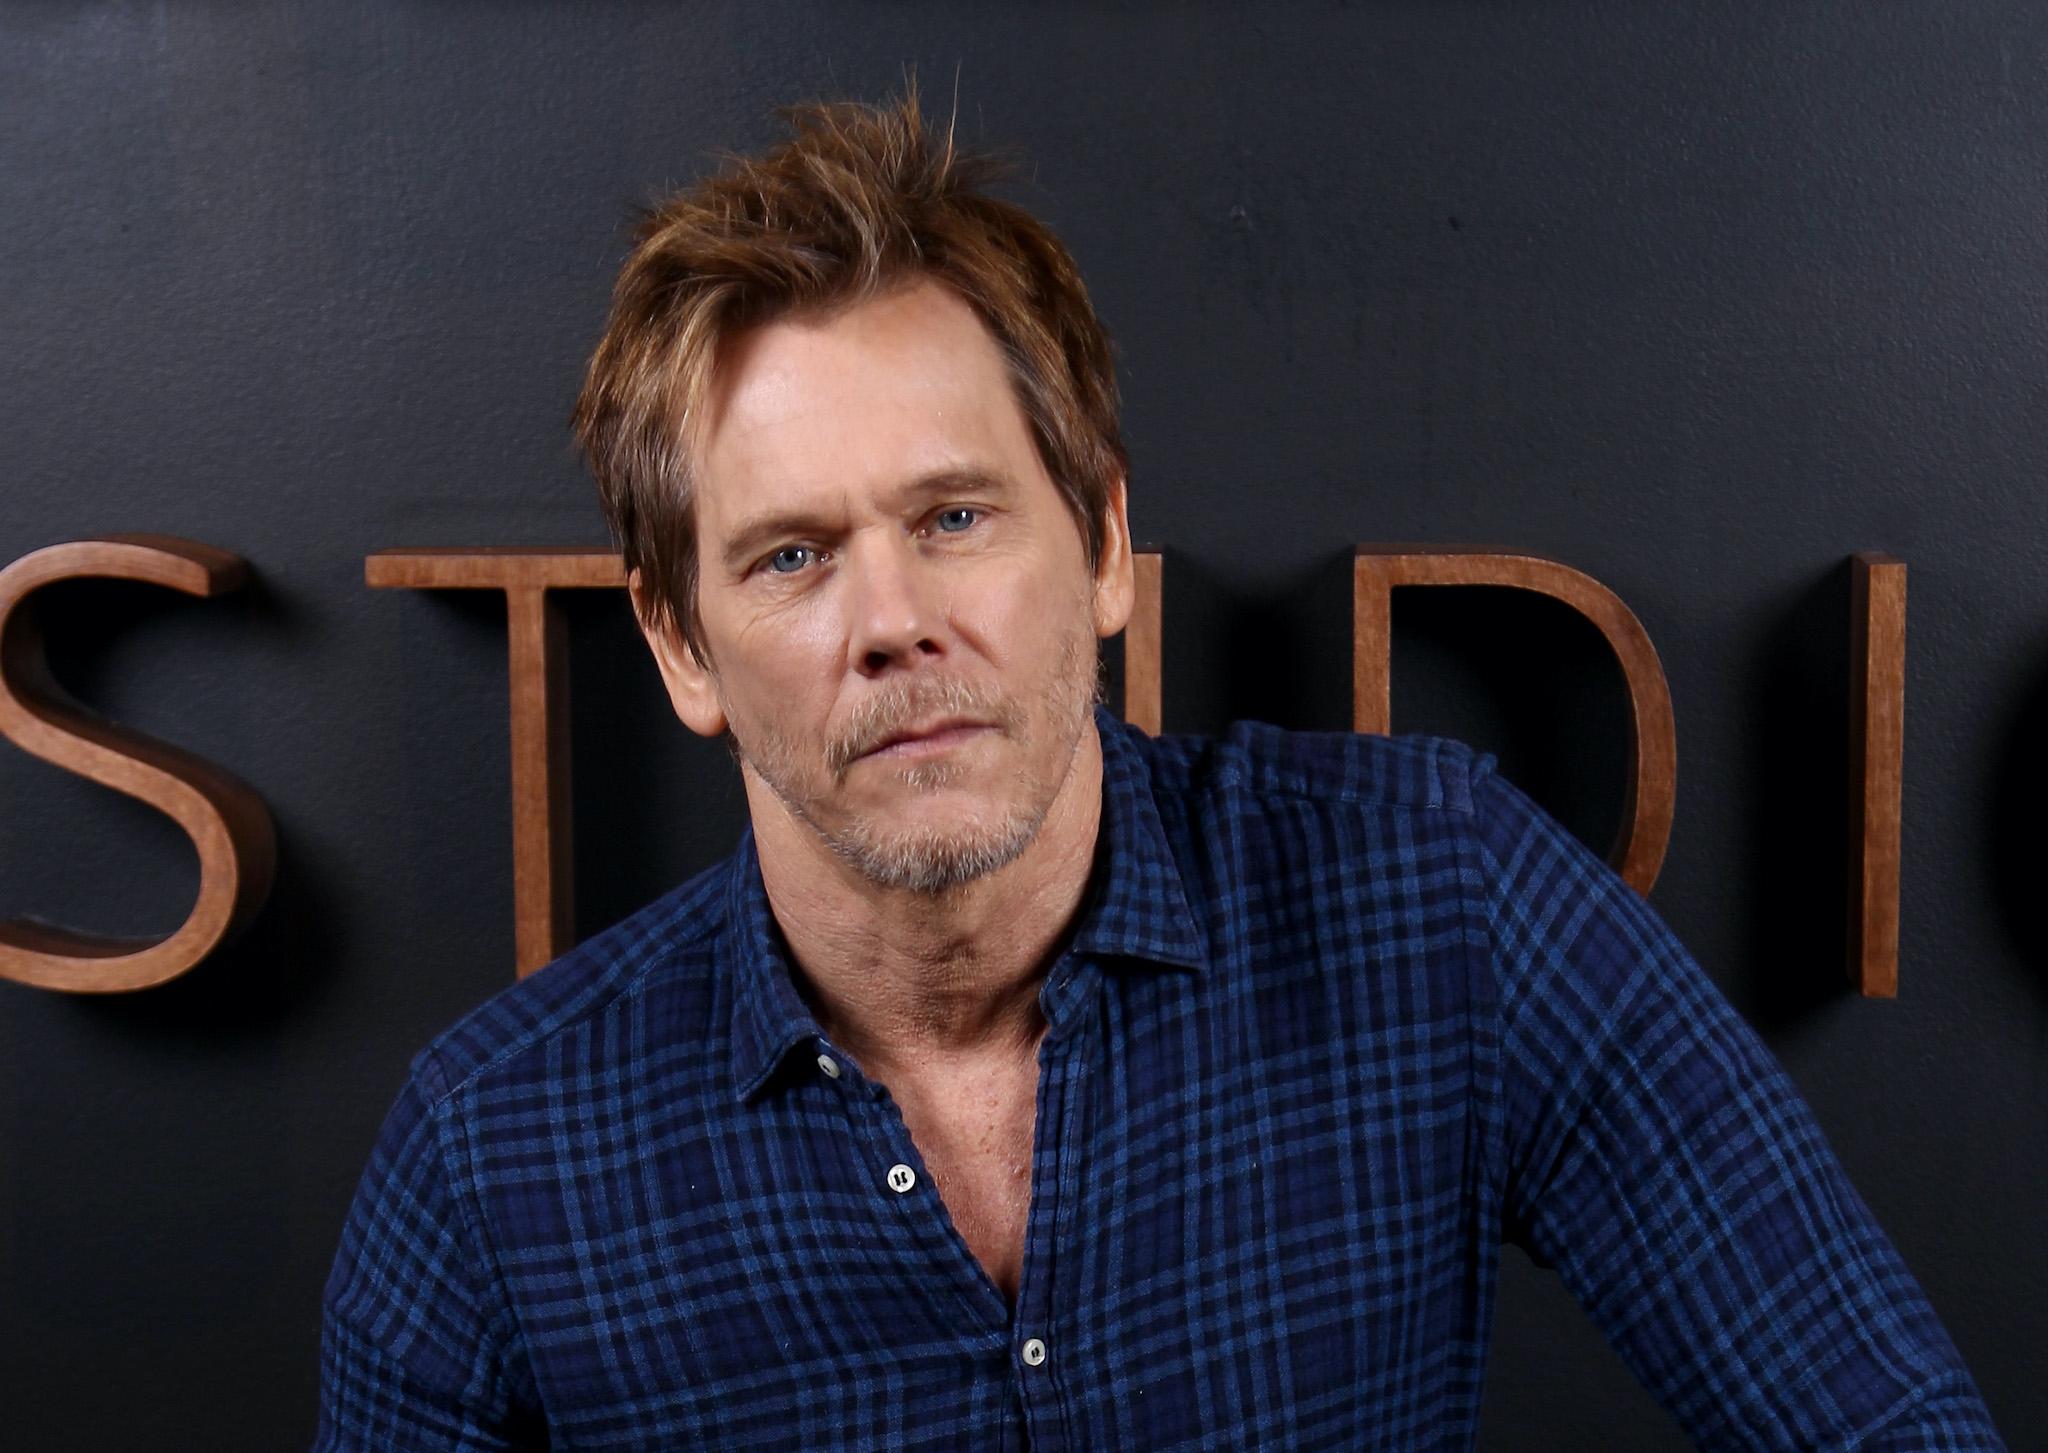 Kevin Bacon shares emotional Instagram post about murdered man with the same name